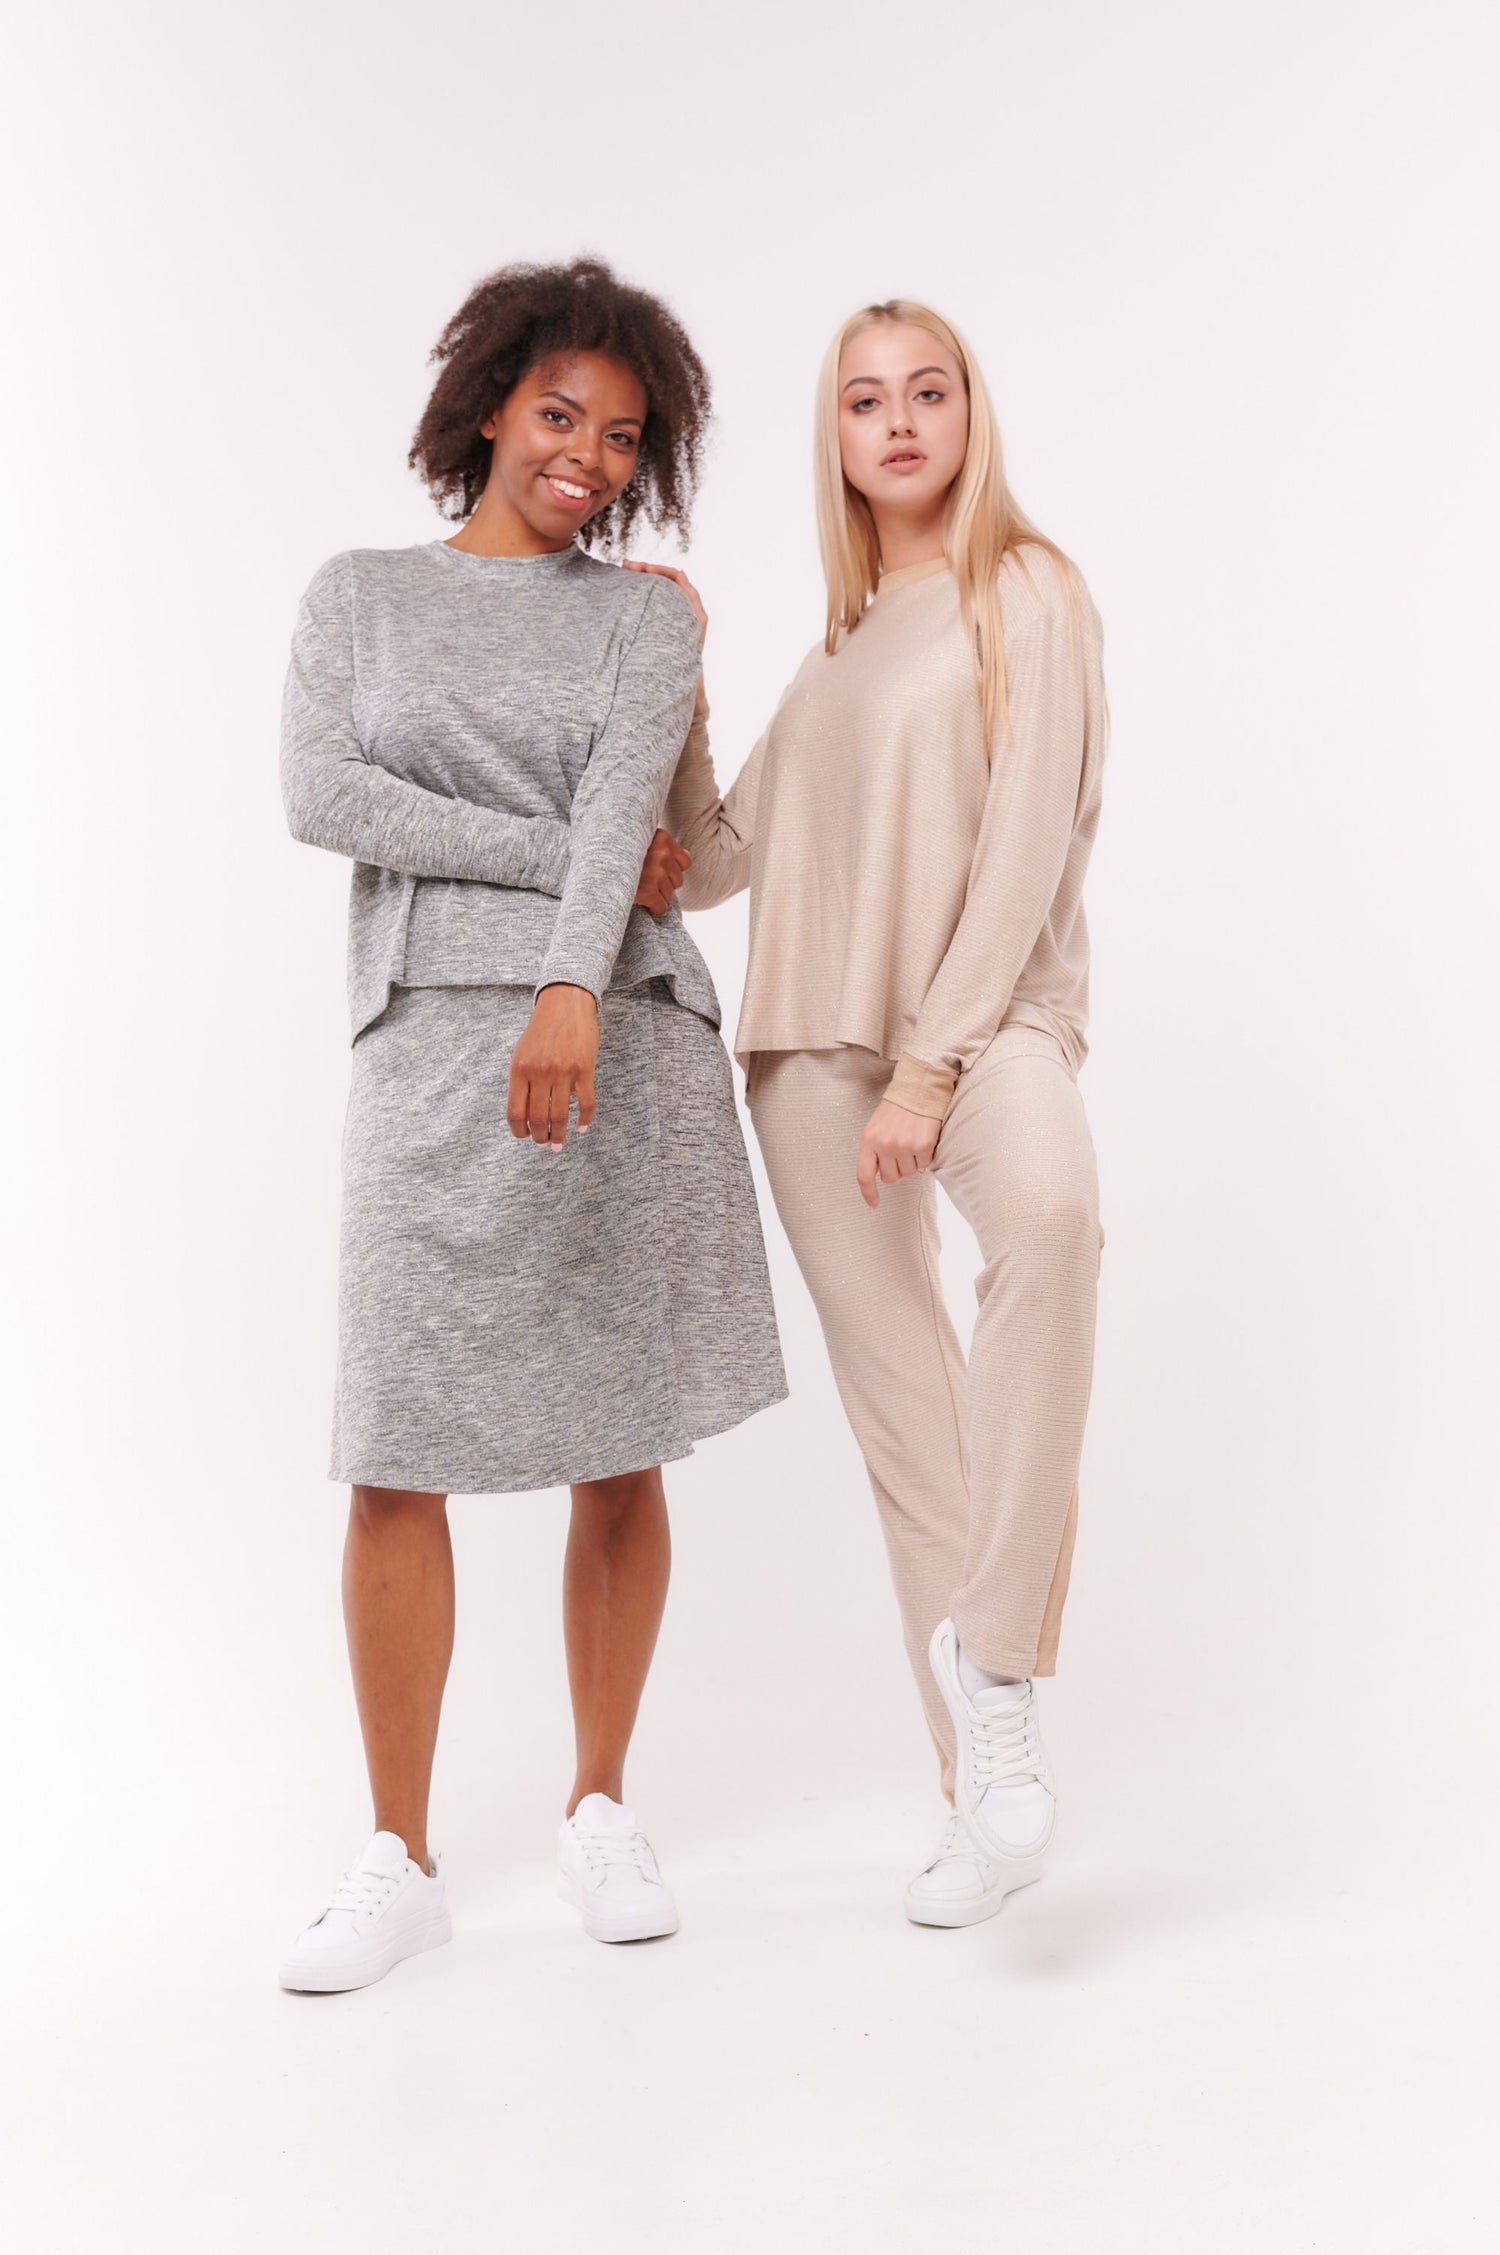 Two woman posing wearing grey and cream leisure clothing.